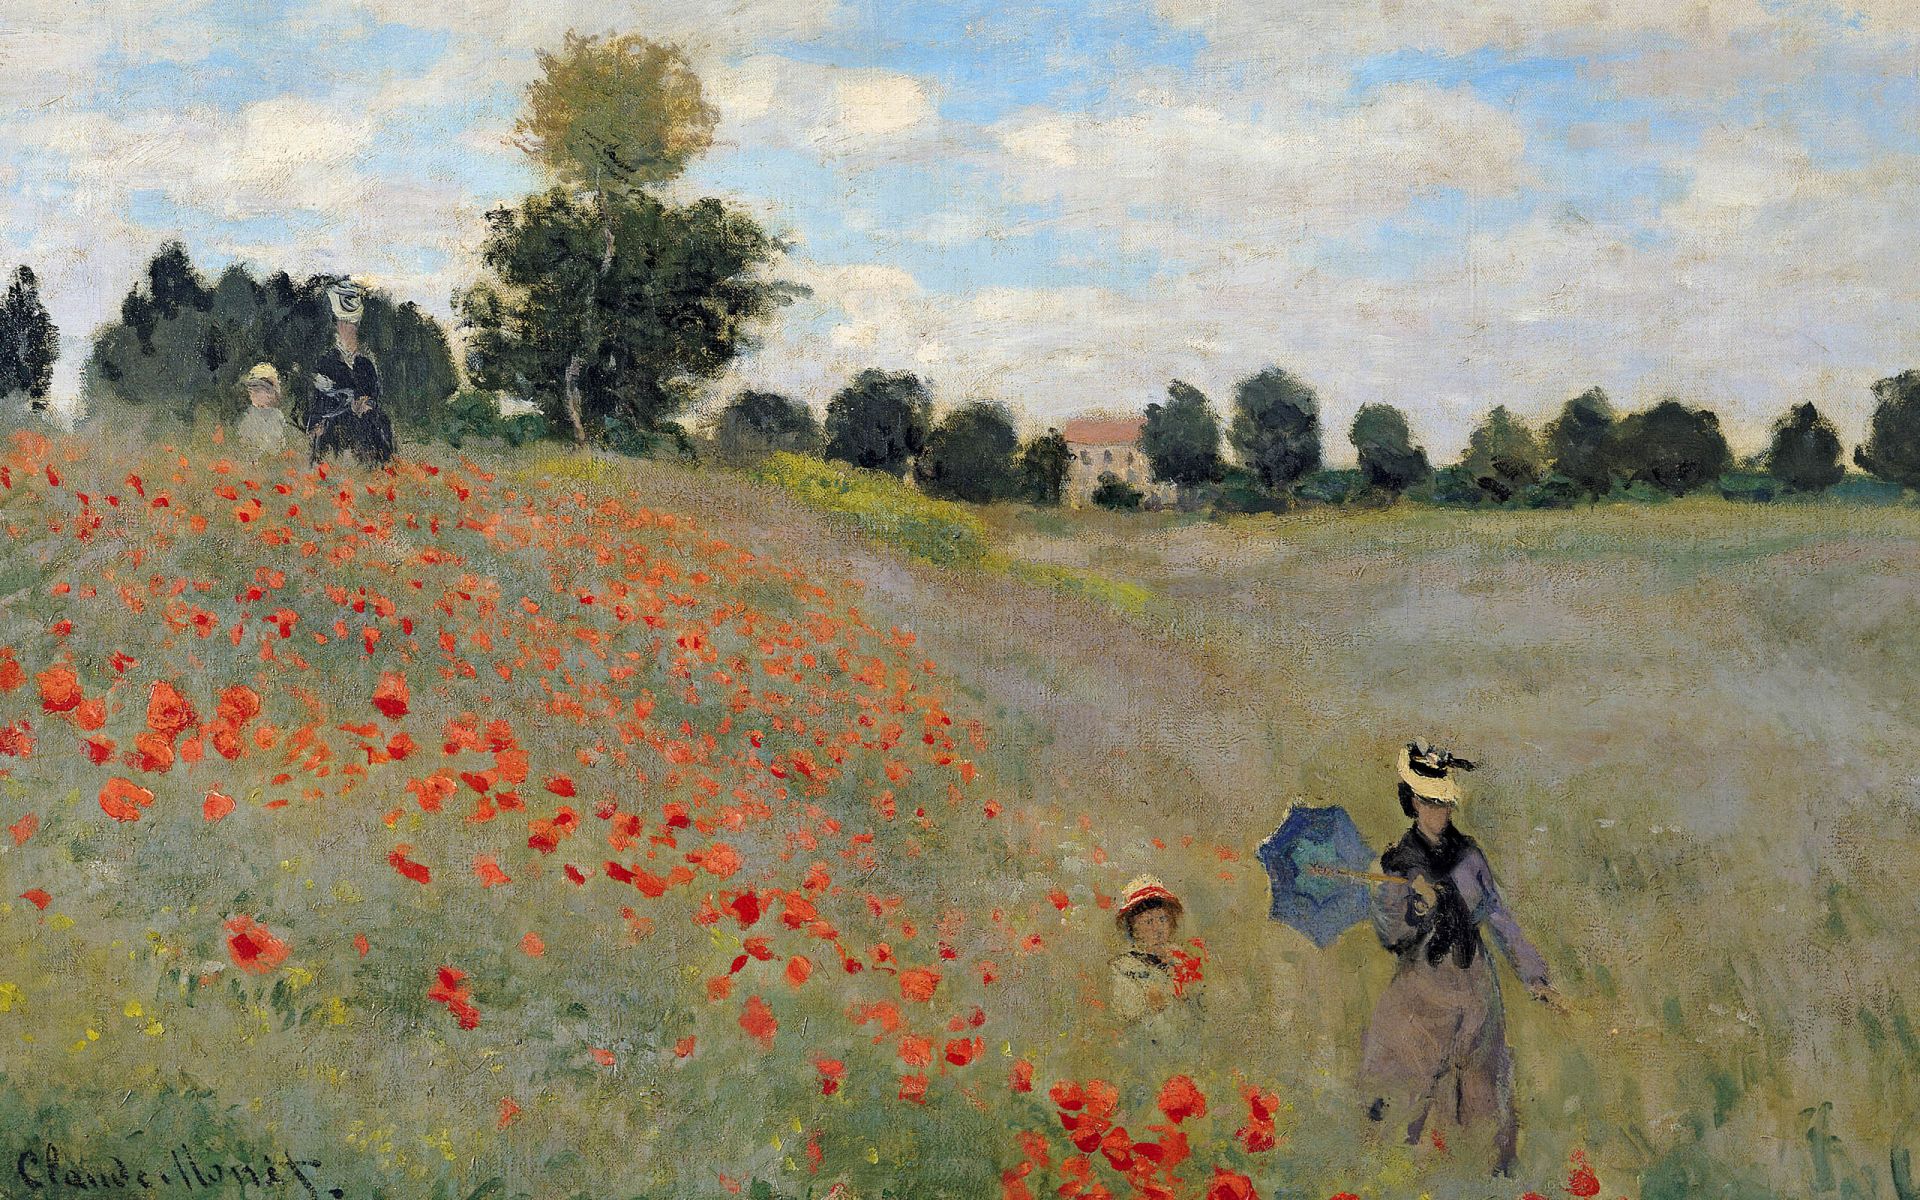  Wallpaper Wild Poppies By Claude Monet Desktop and make this wallpaper